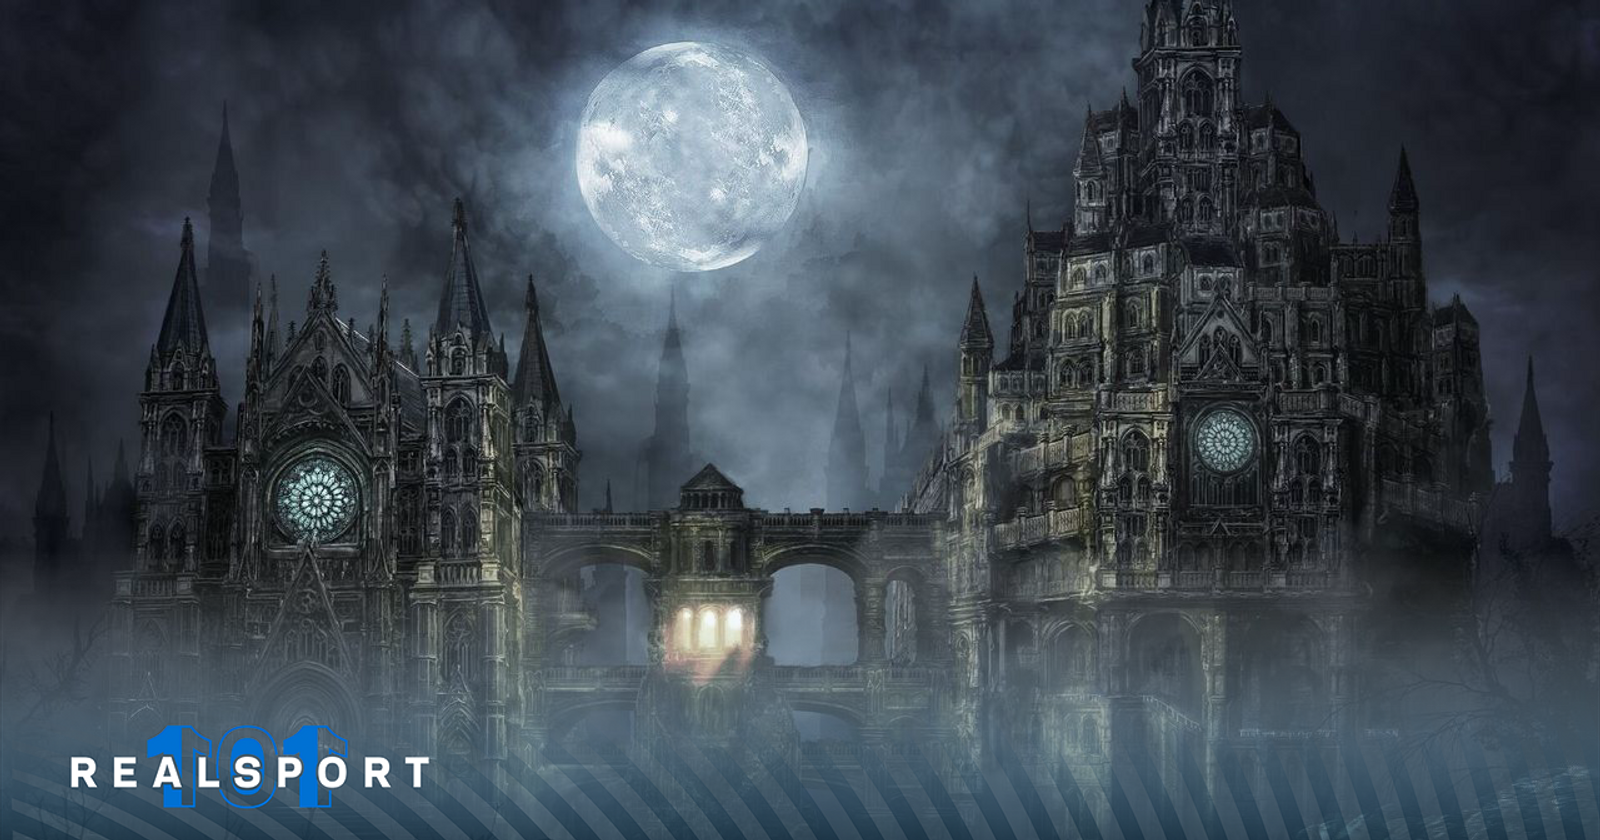 Bloodborne Remake and Sequel Could Be the Awaited Announcement at